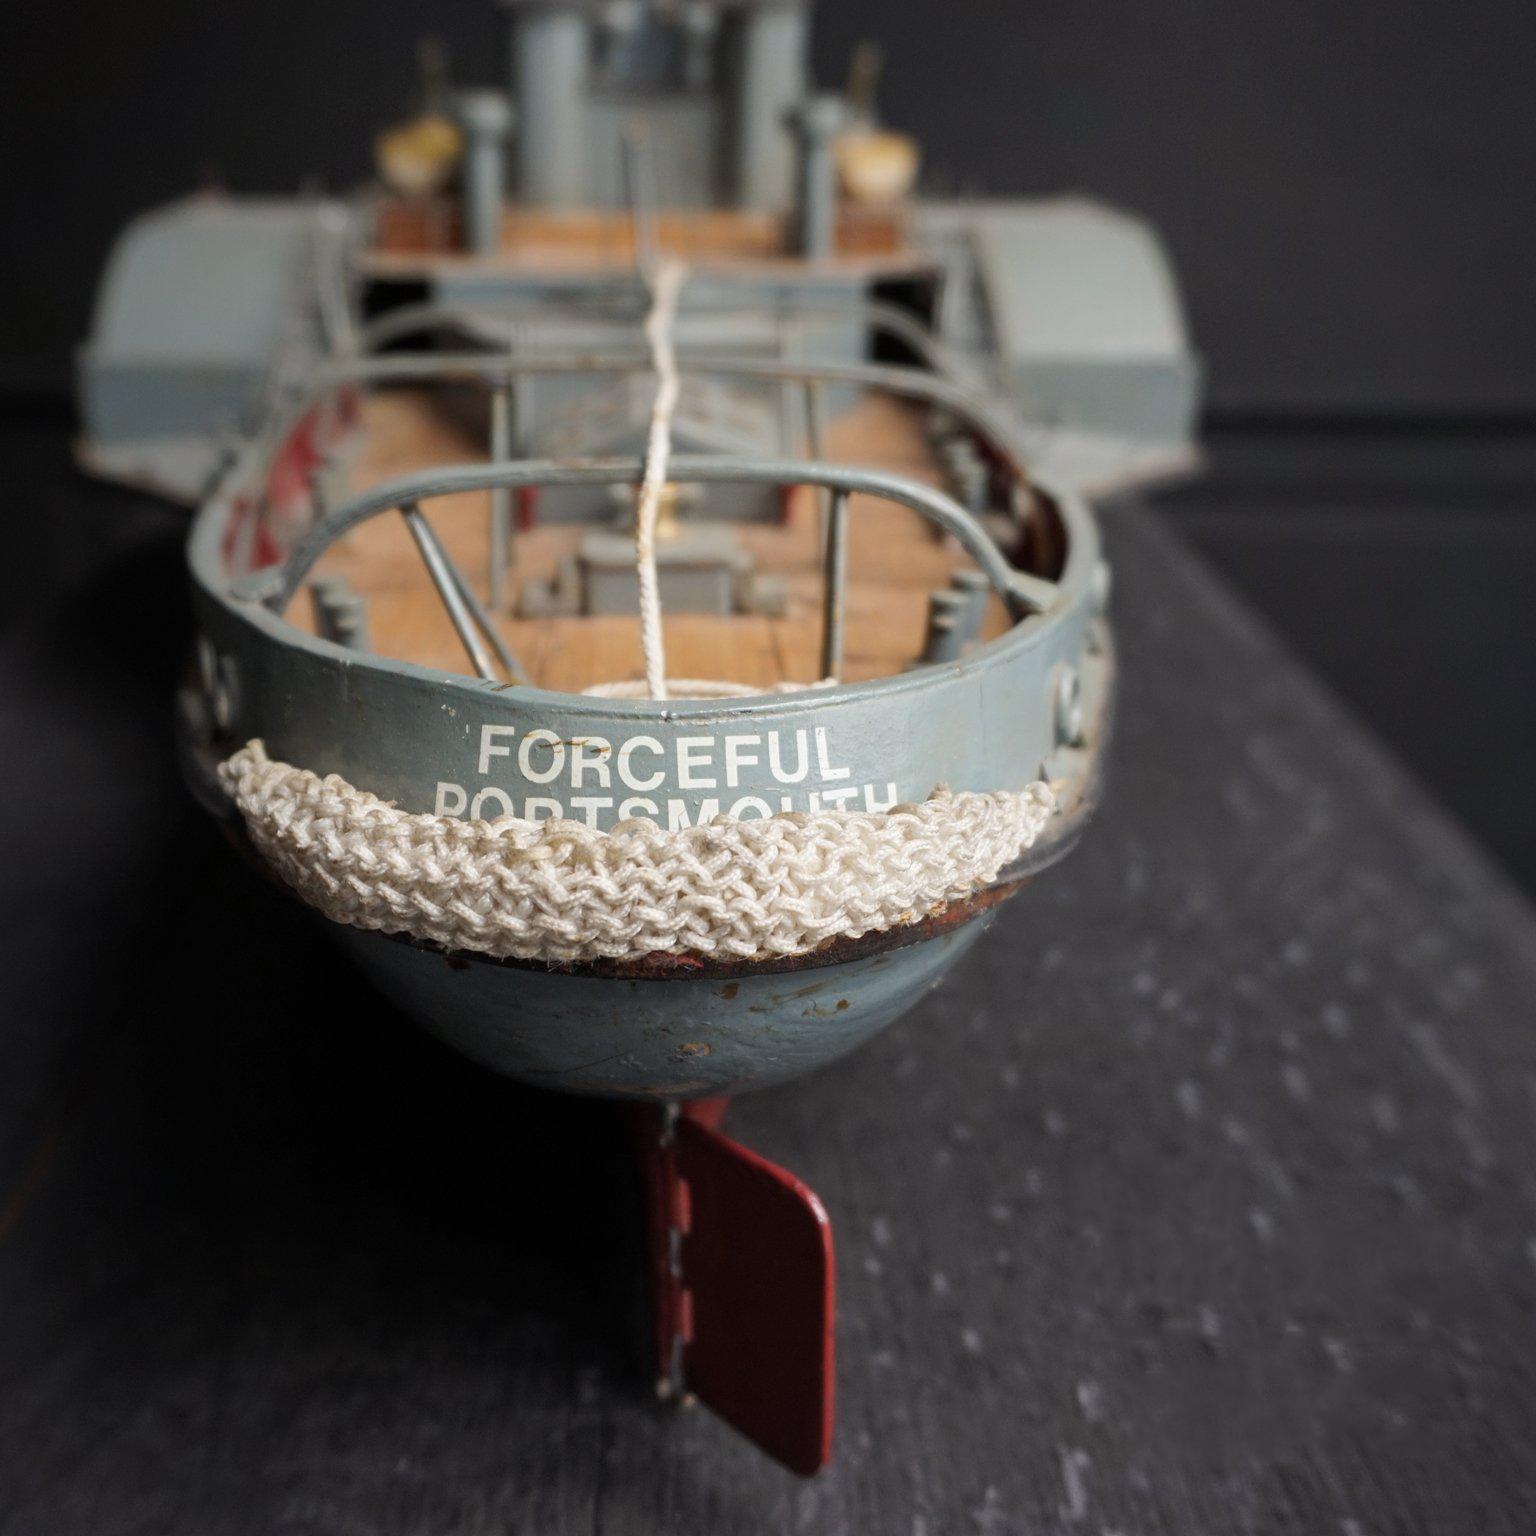 1960s English Wooden Model of the 'Forceful in Portsmouth' Paddle Wheel Boat For Sale 2